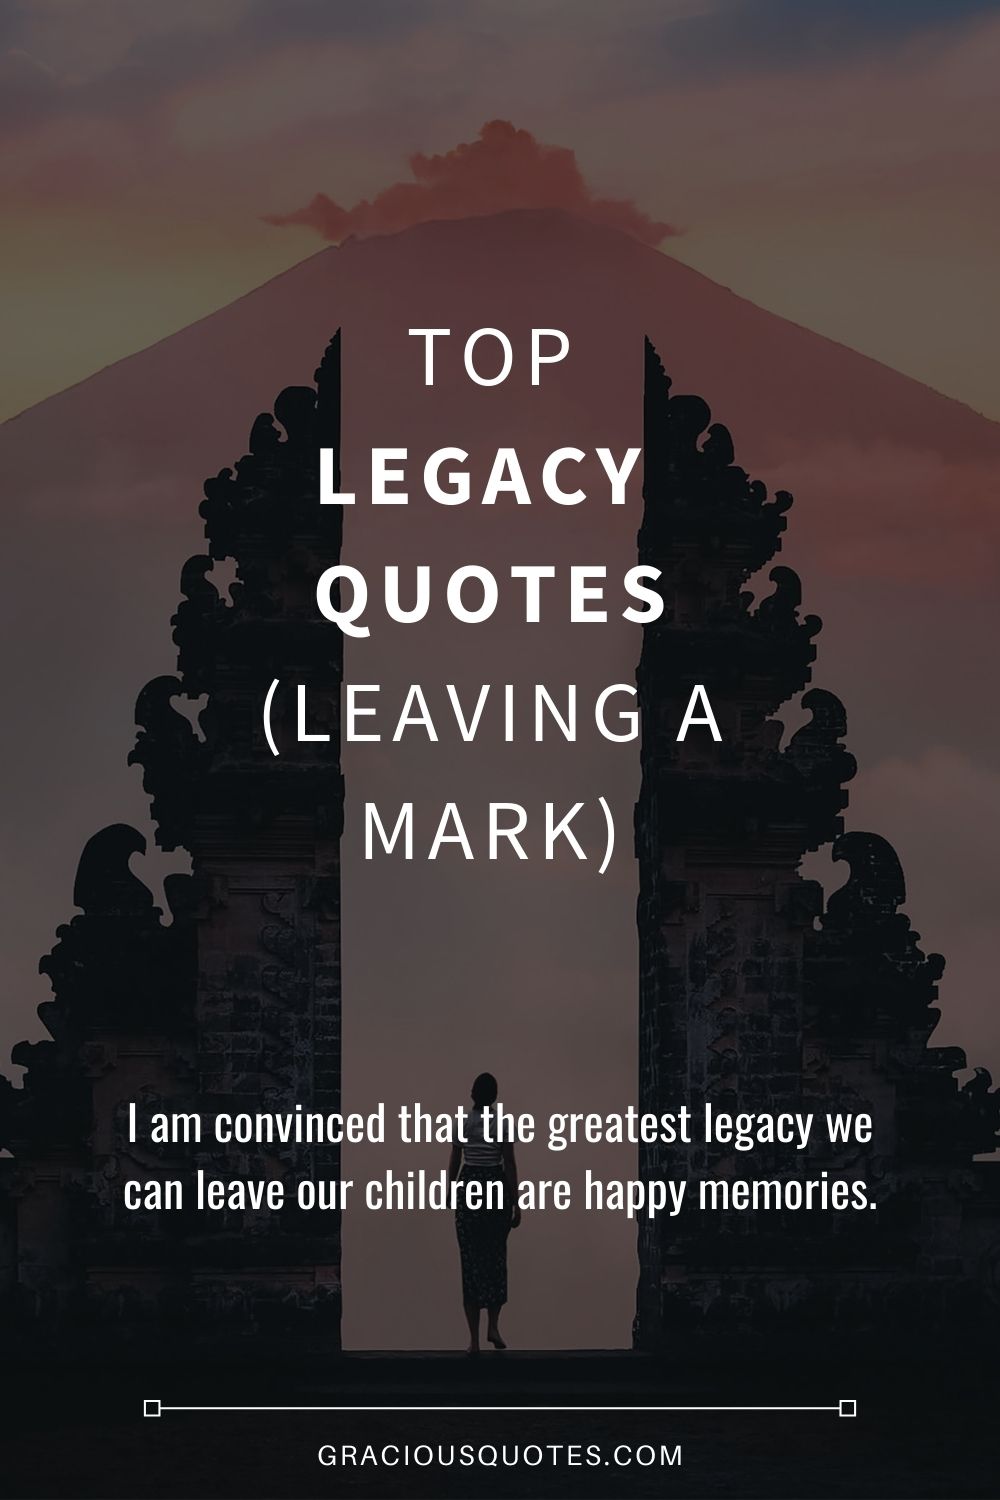 Top Legacy Quotes (LEAVING A MARK) - Gracious Quotes